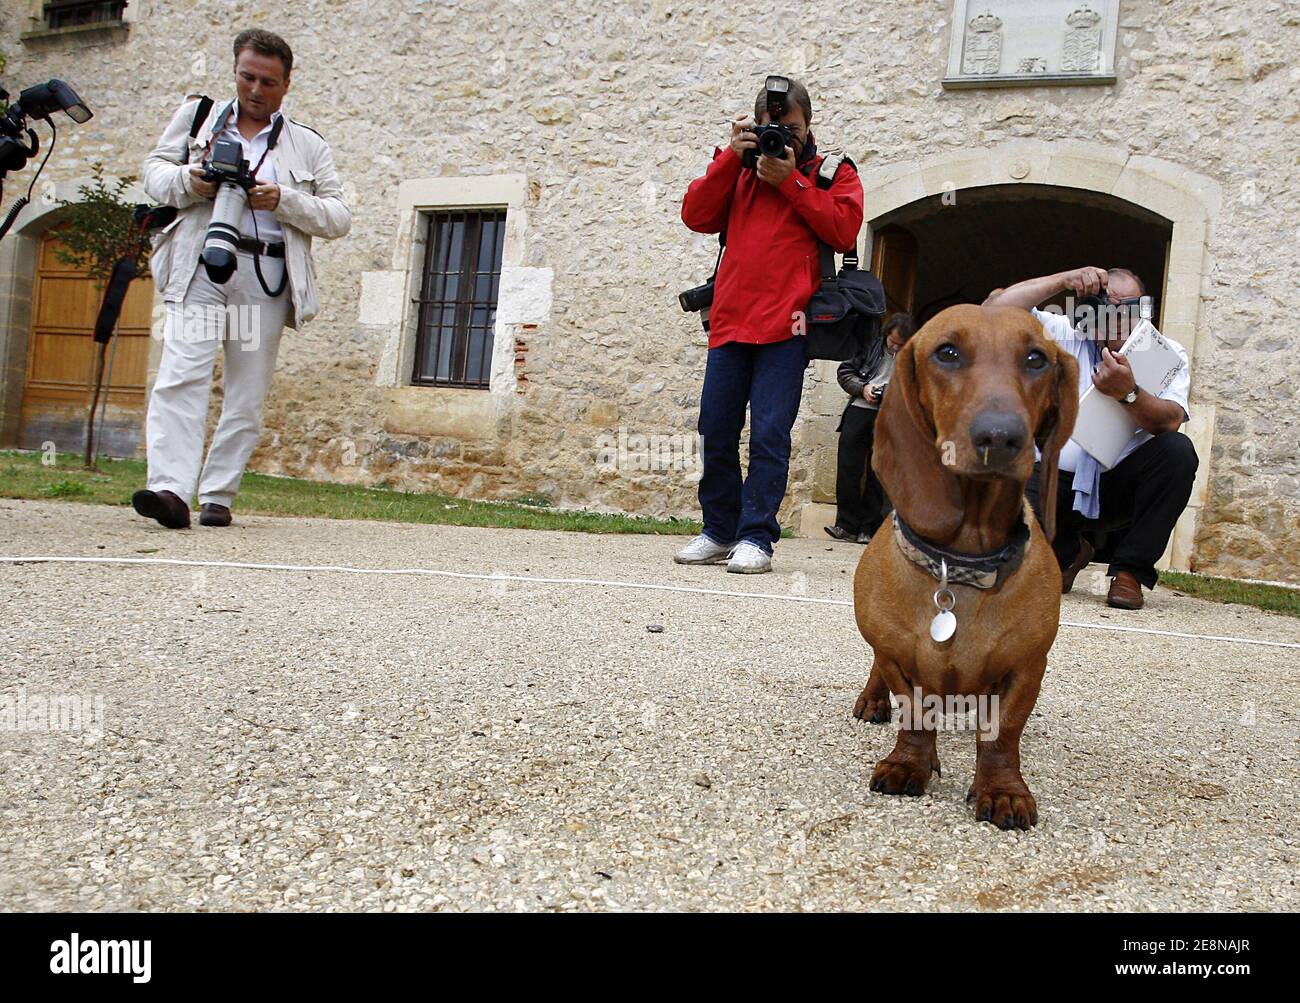 Danish Royal's dog 'Helike' poses during a photo call in his summer residence 'Chateau de Caix' near Cahors, France, on August 7, 2007. Photo by Patrick Bernard/ABACAPRESS.COM Stock Photo